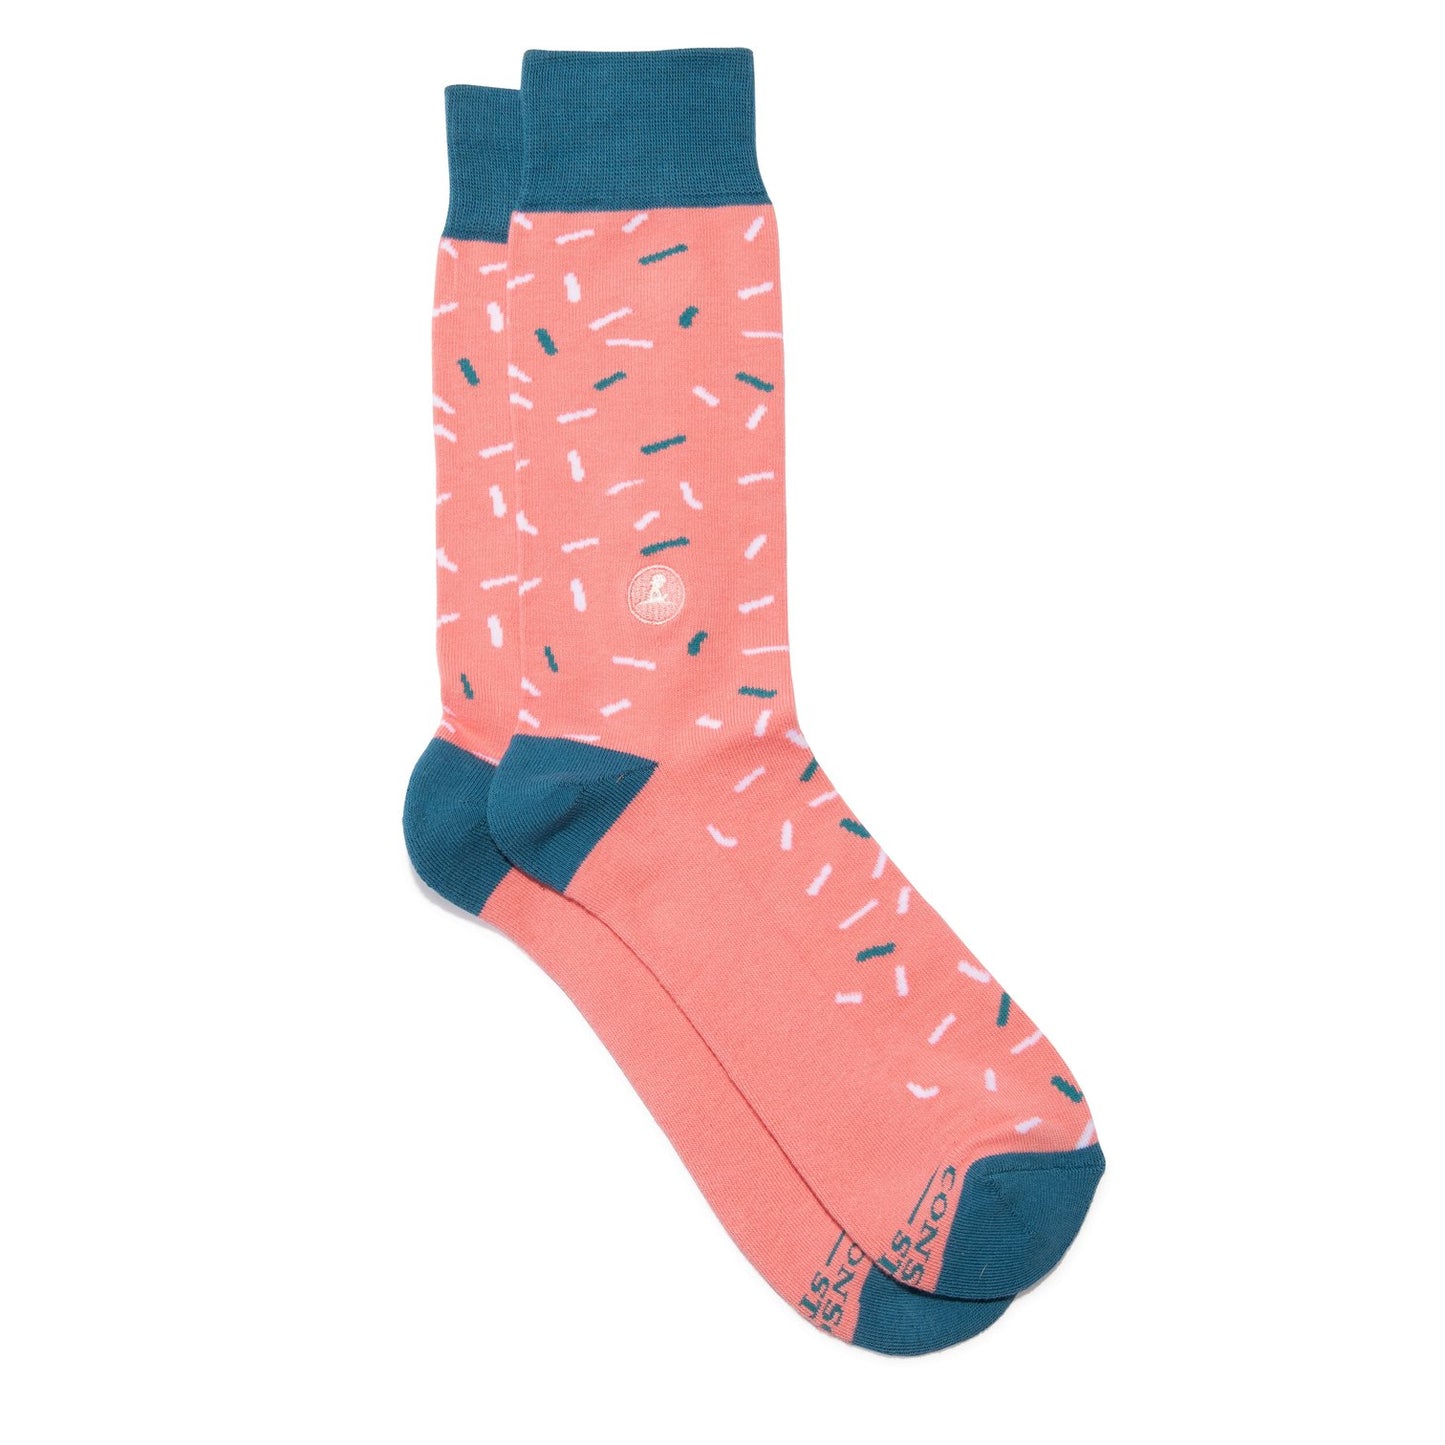 Conscious Step: Socks that find a cure